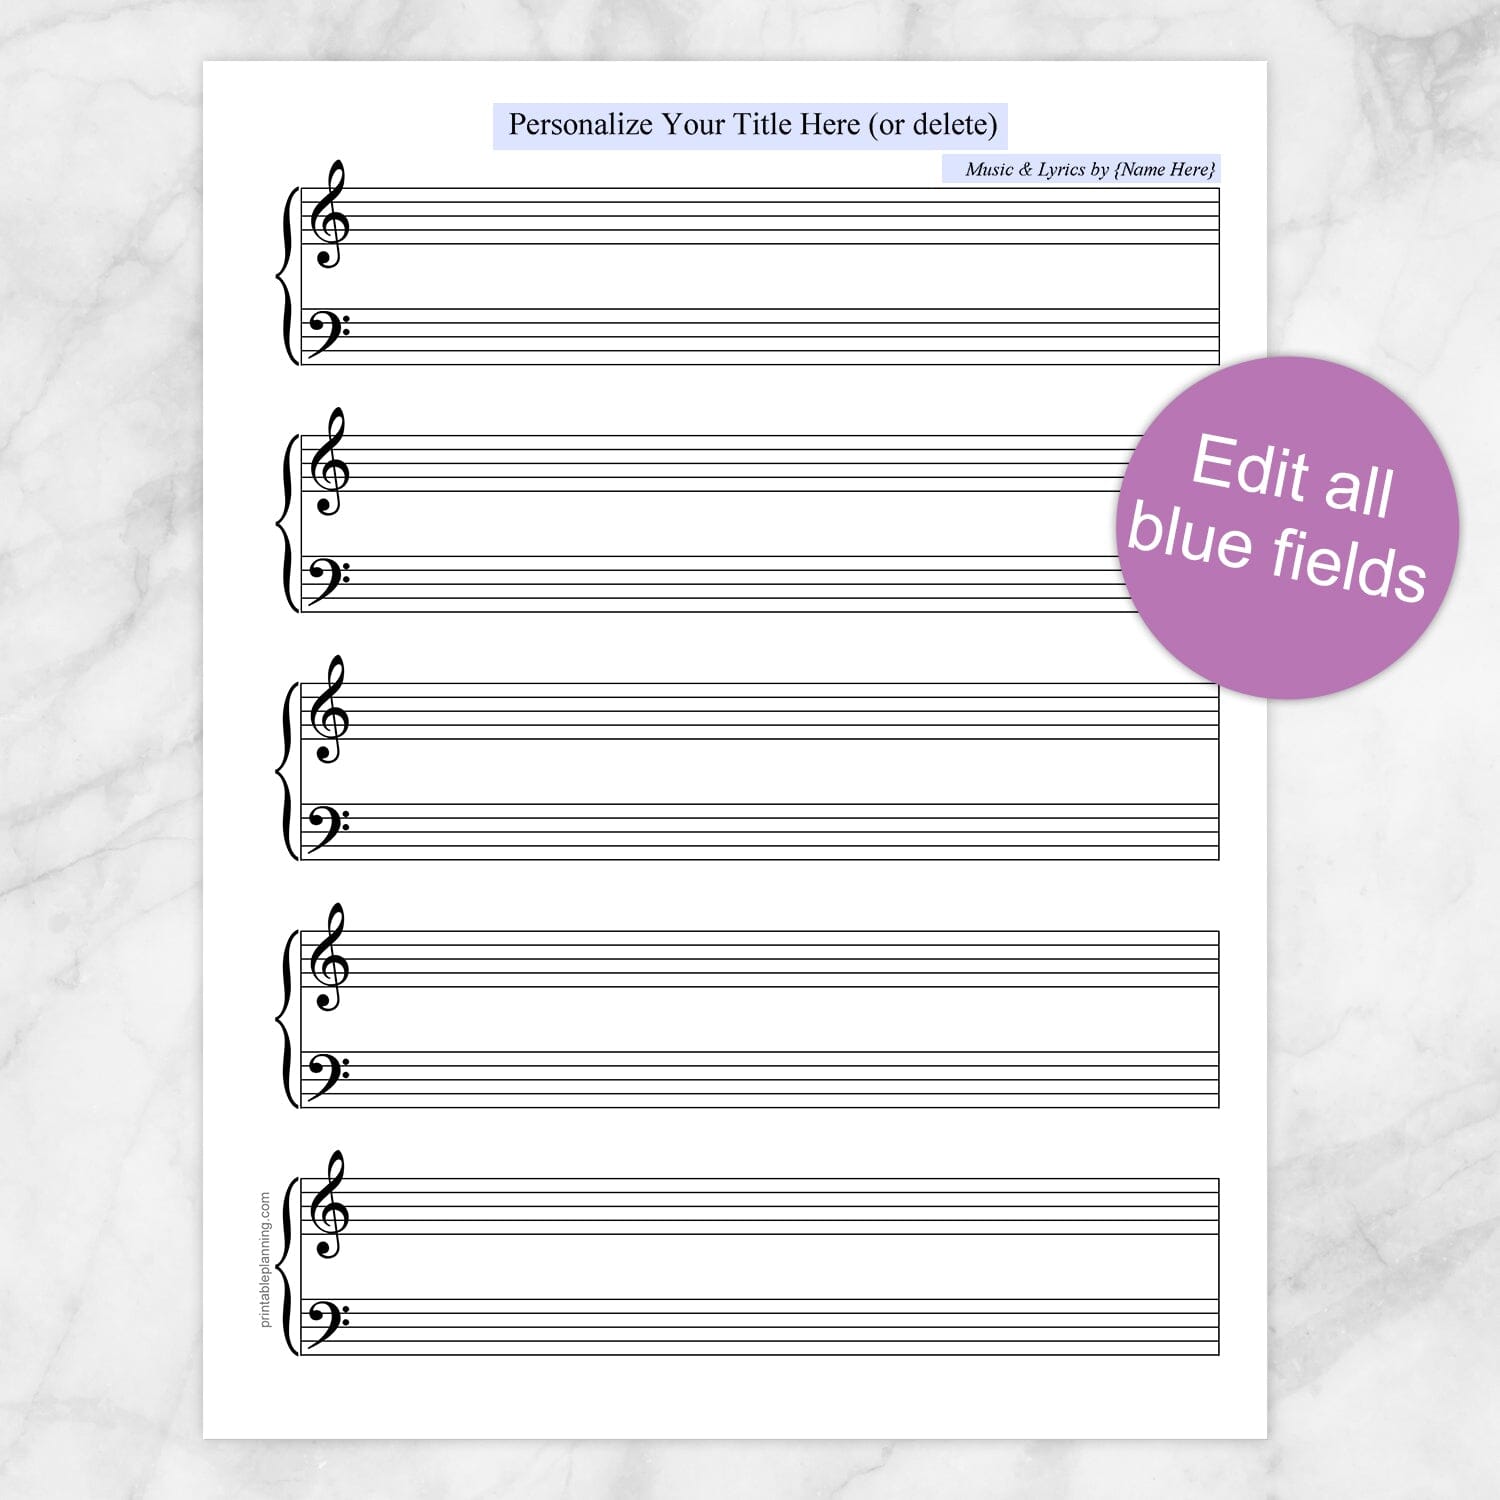 Printable Personalized Blank Piano and Vocals Sheet Music at Printable Planning. Edit the blue fields.